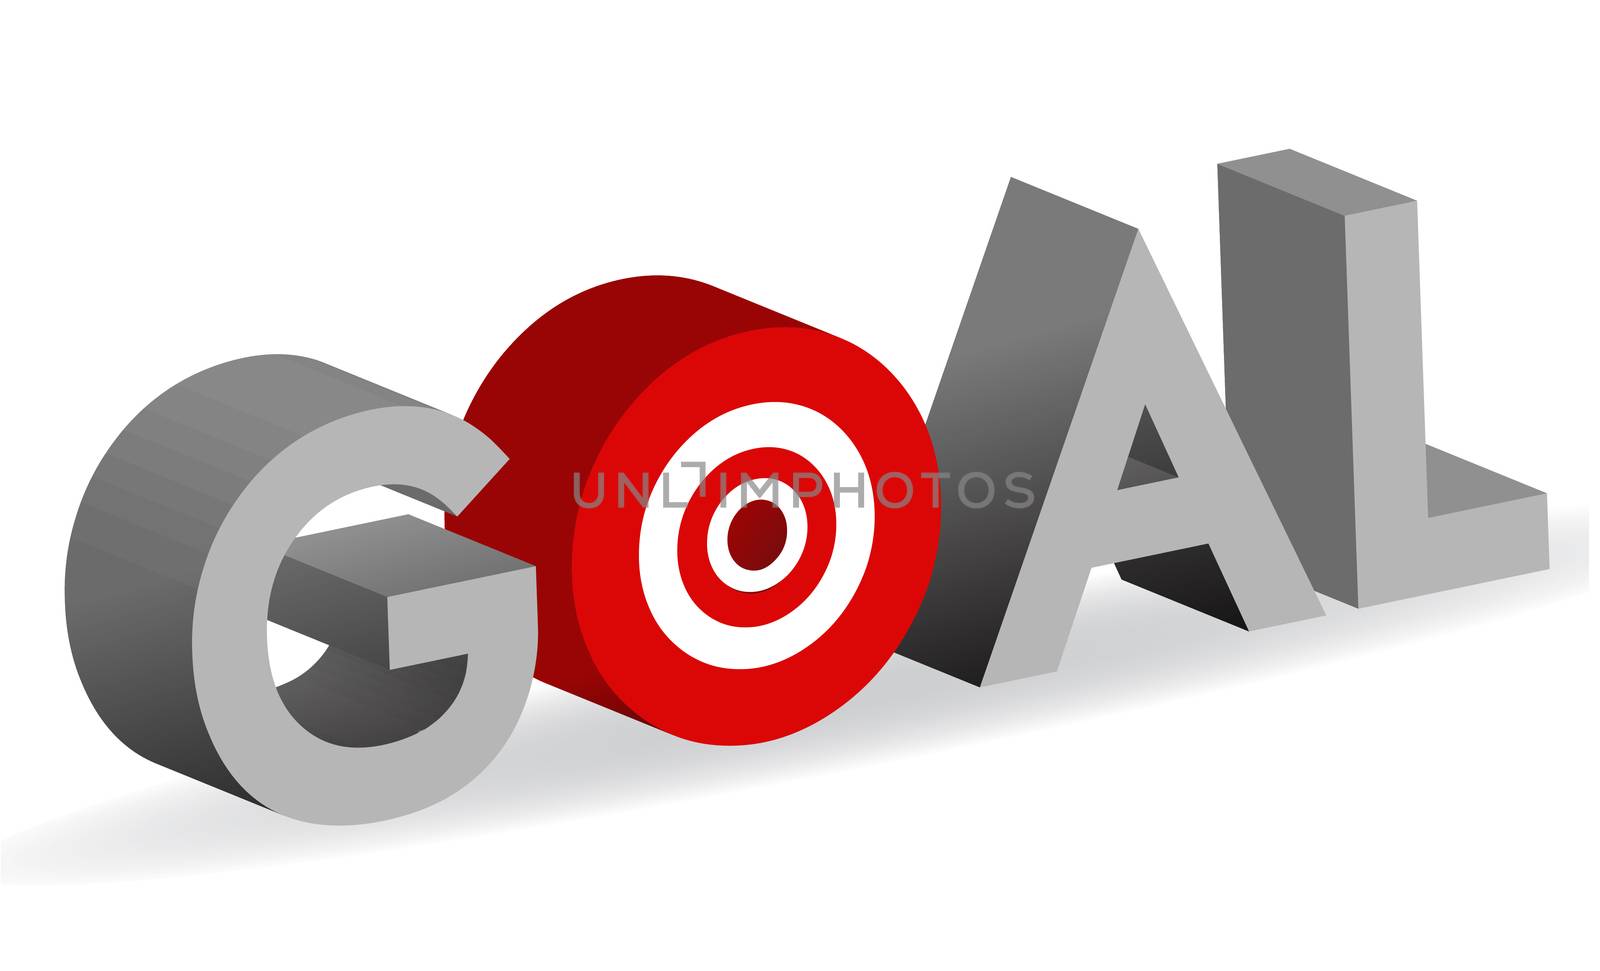 Goal word with bullseye target sign by alexmillos